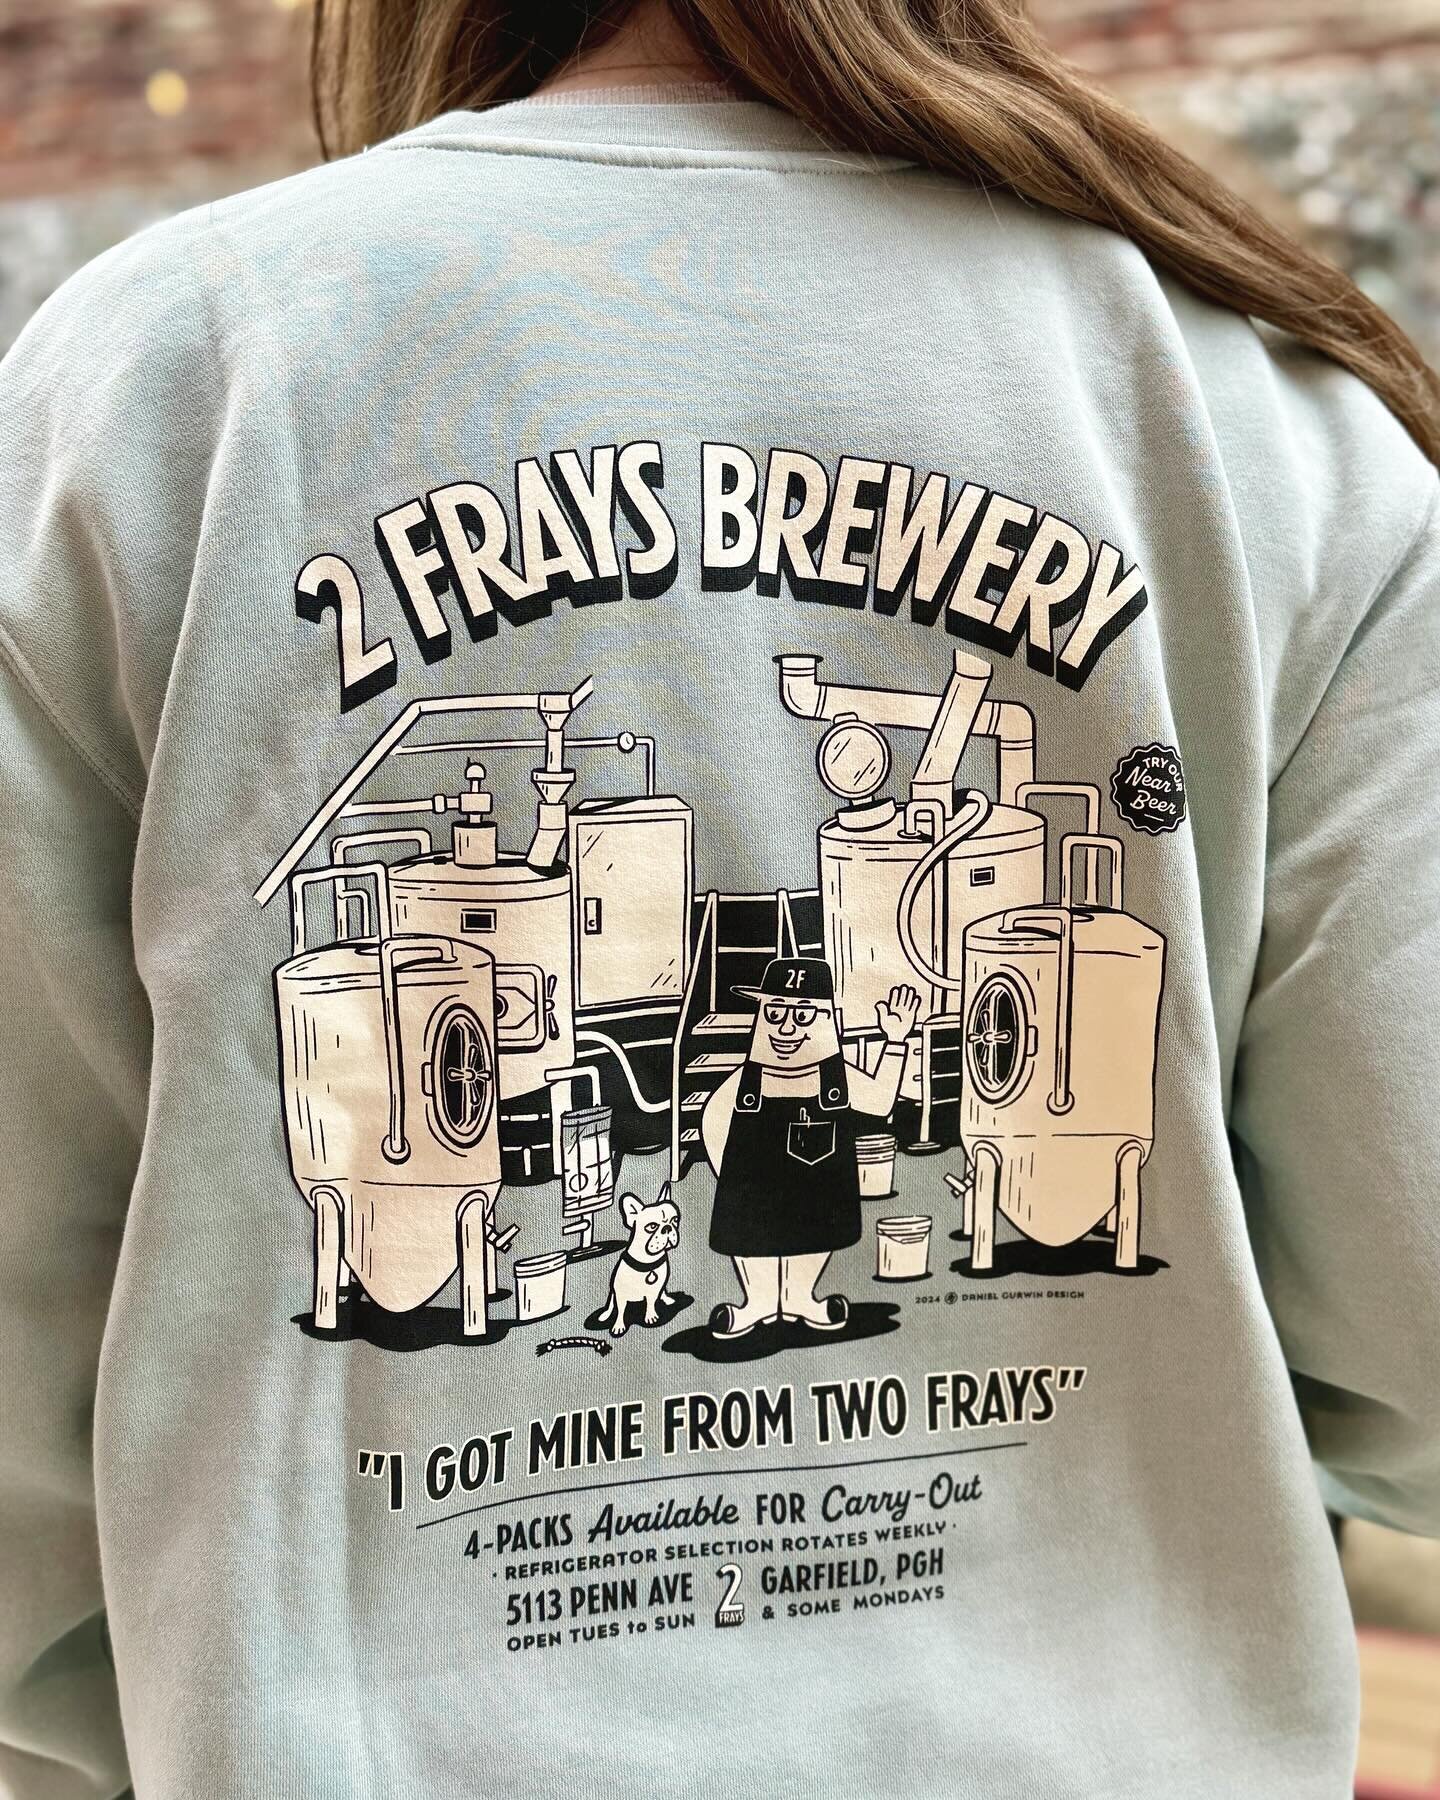 February flew by, but this is one of our favorite projects from the past month. Shop Tee-inspired merch for @twofraysbrewery . Get your own in their taproom!